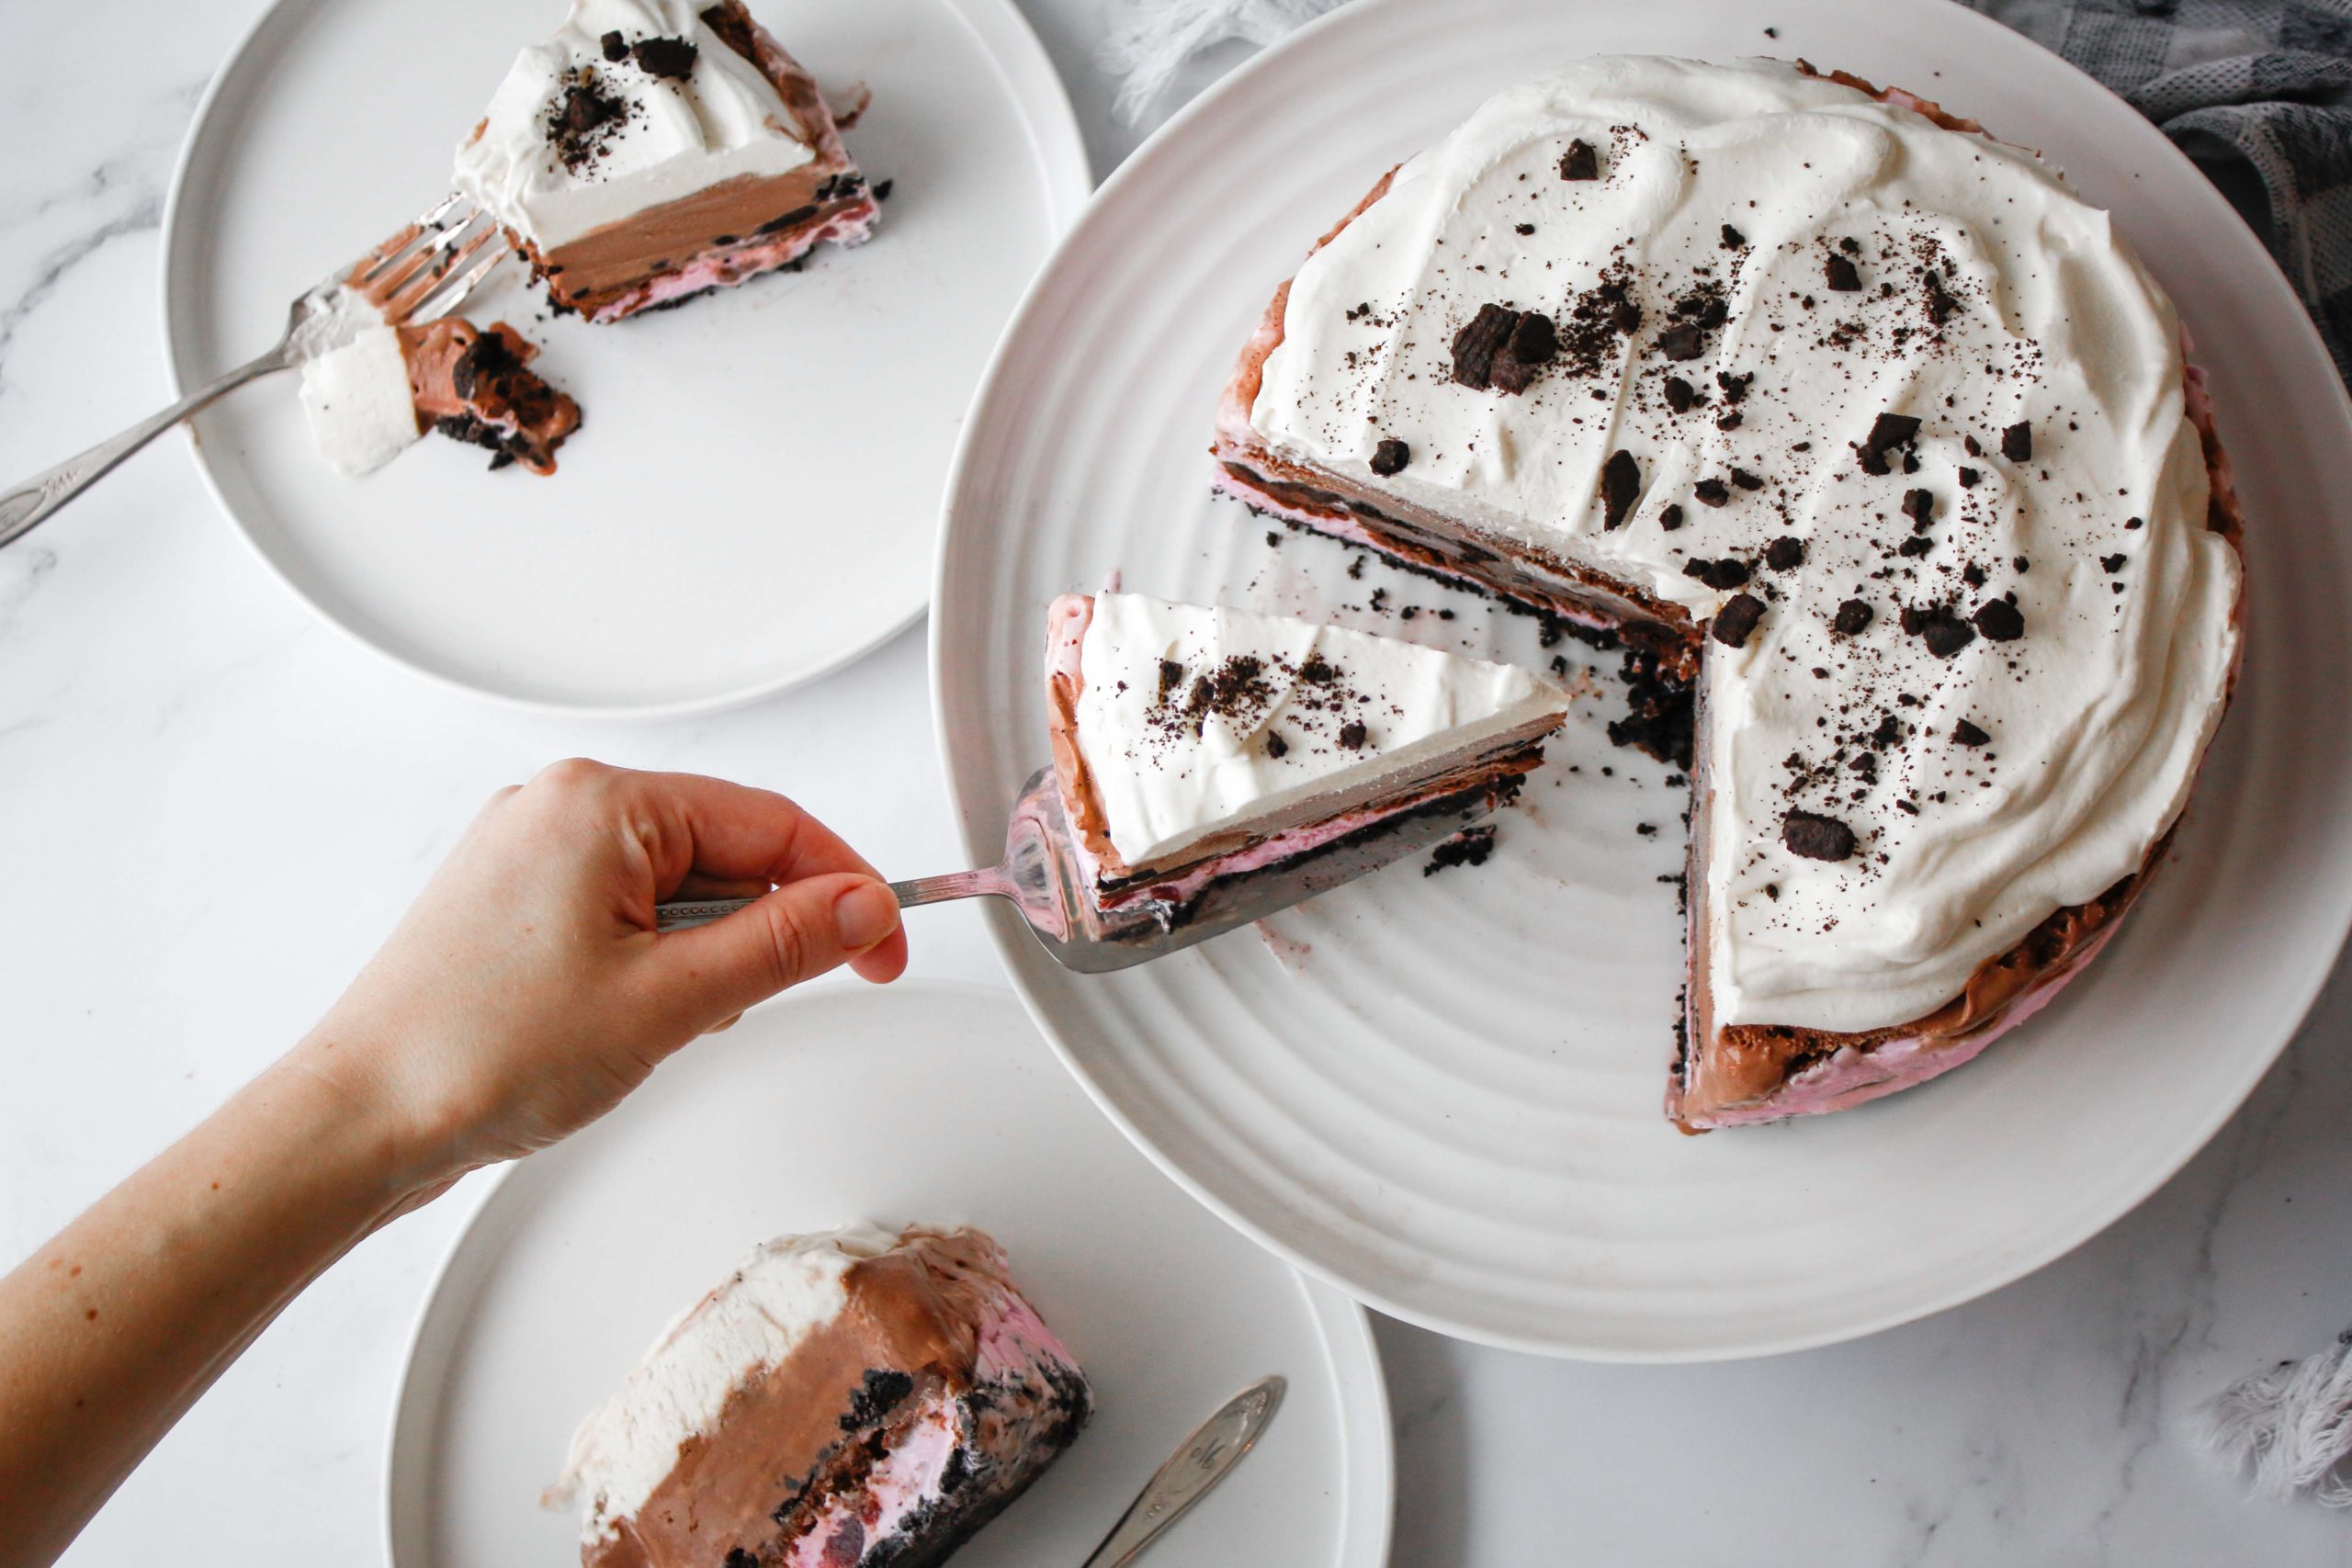 Cutting slices of ice cream cake topped with cookie crumble.